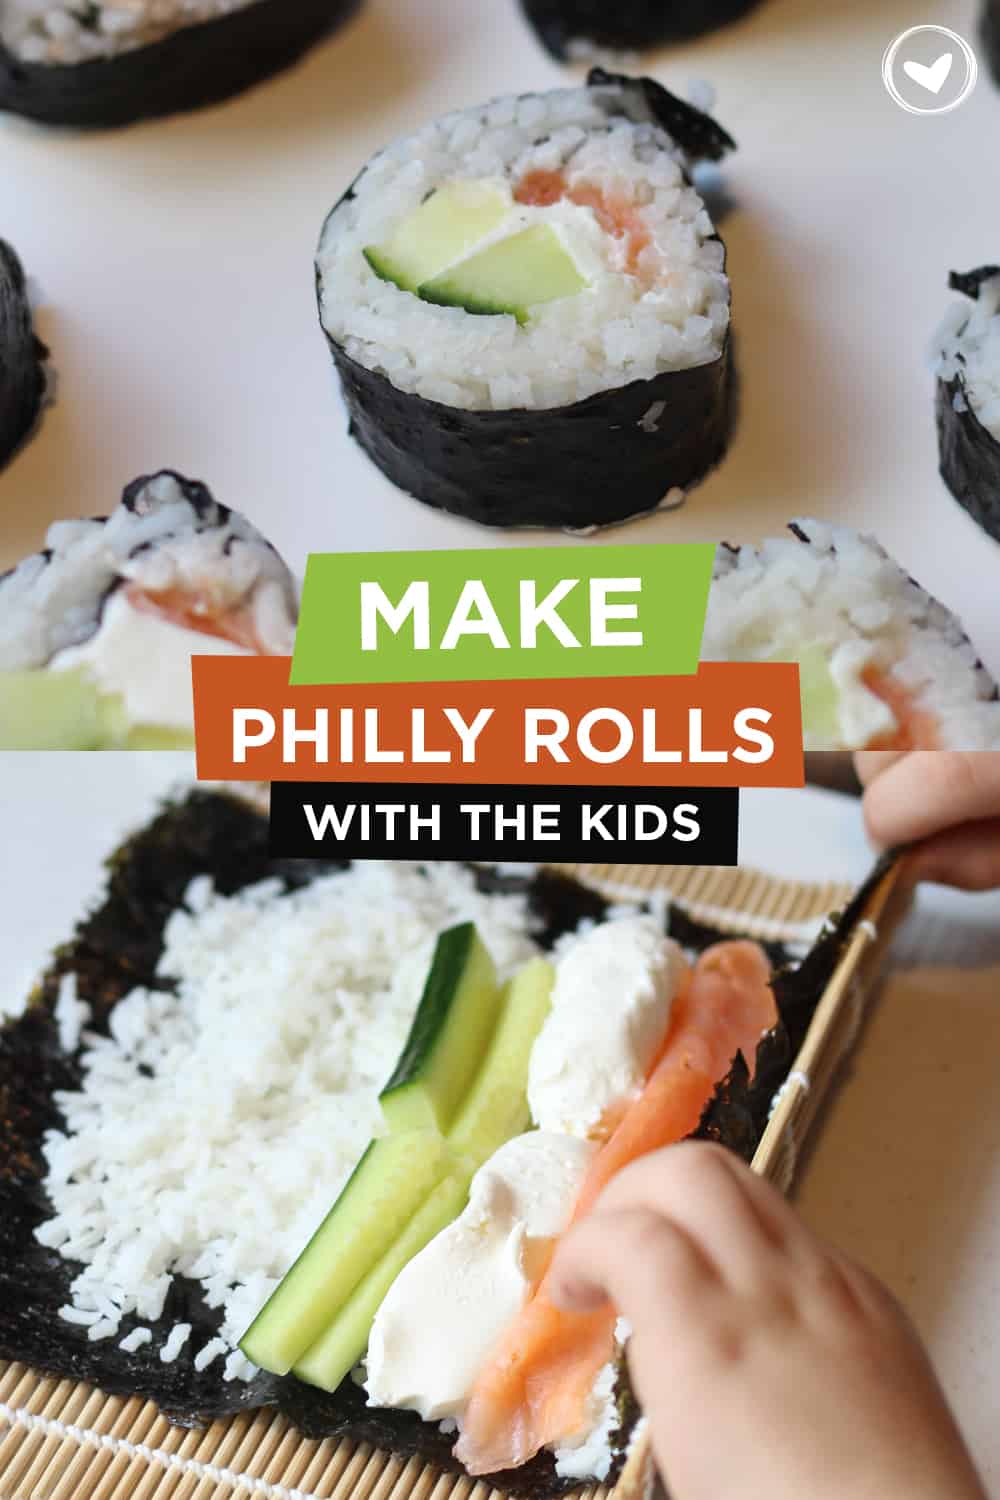 Make Philly Rolls With The Kids